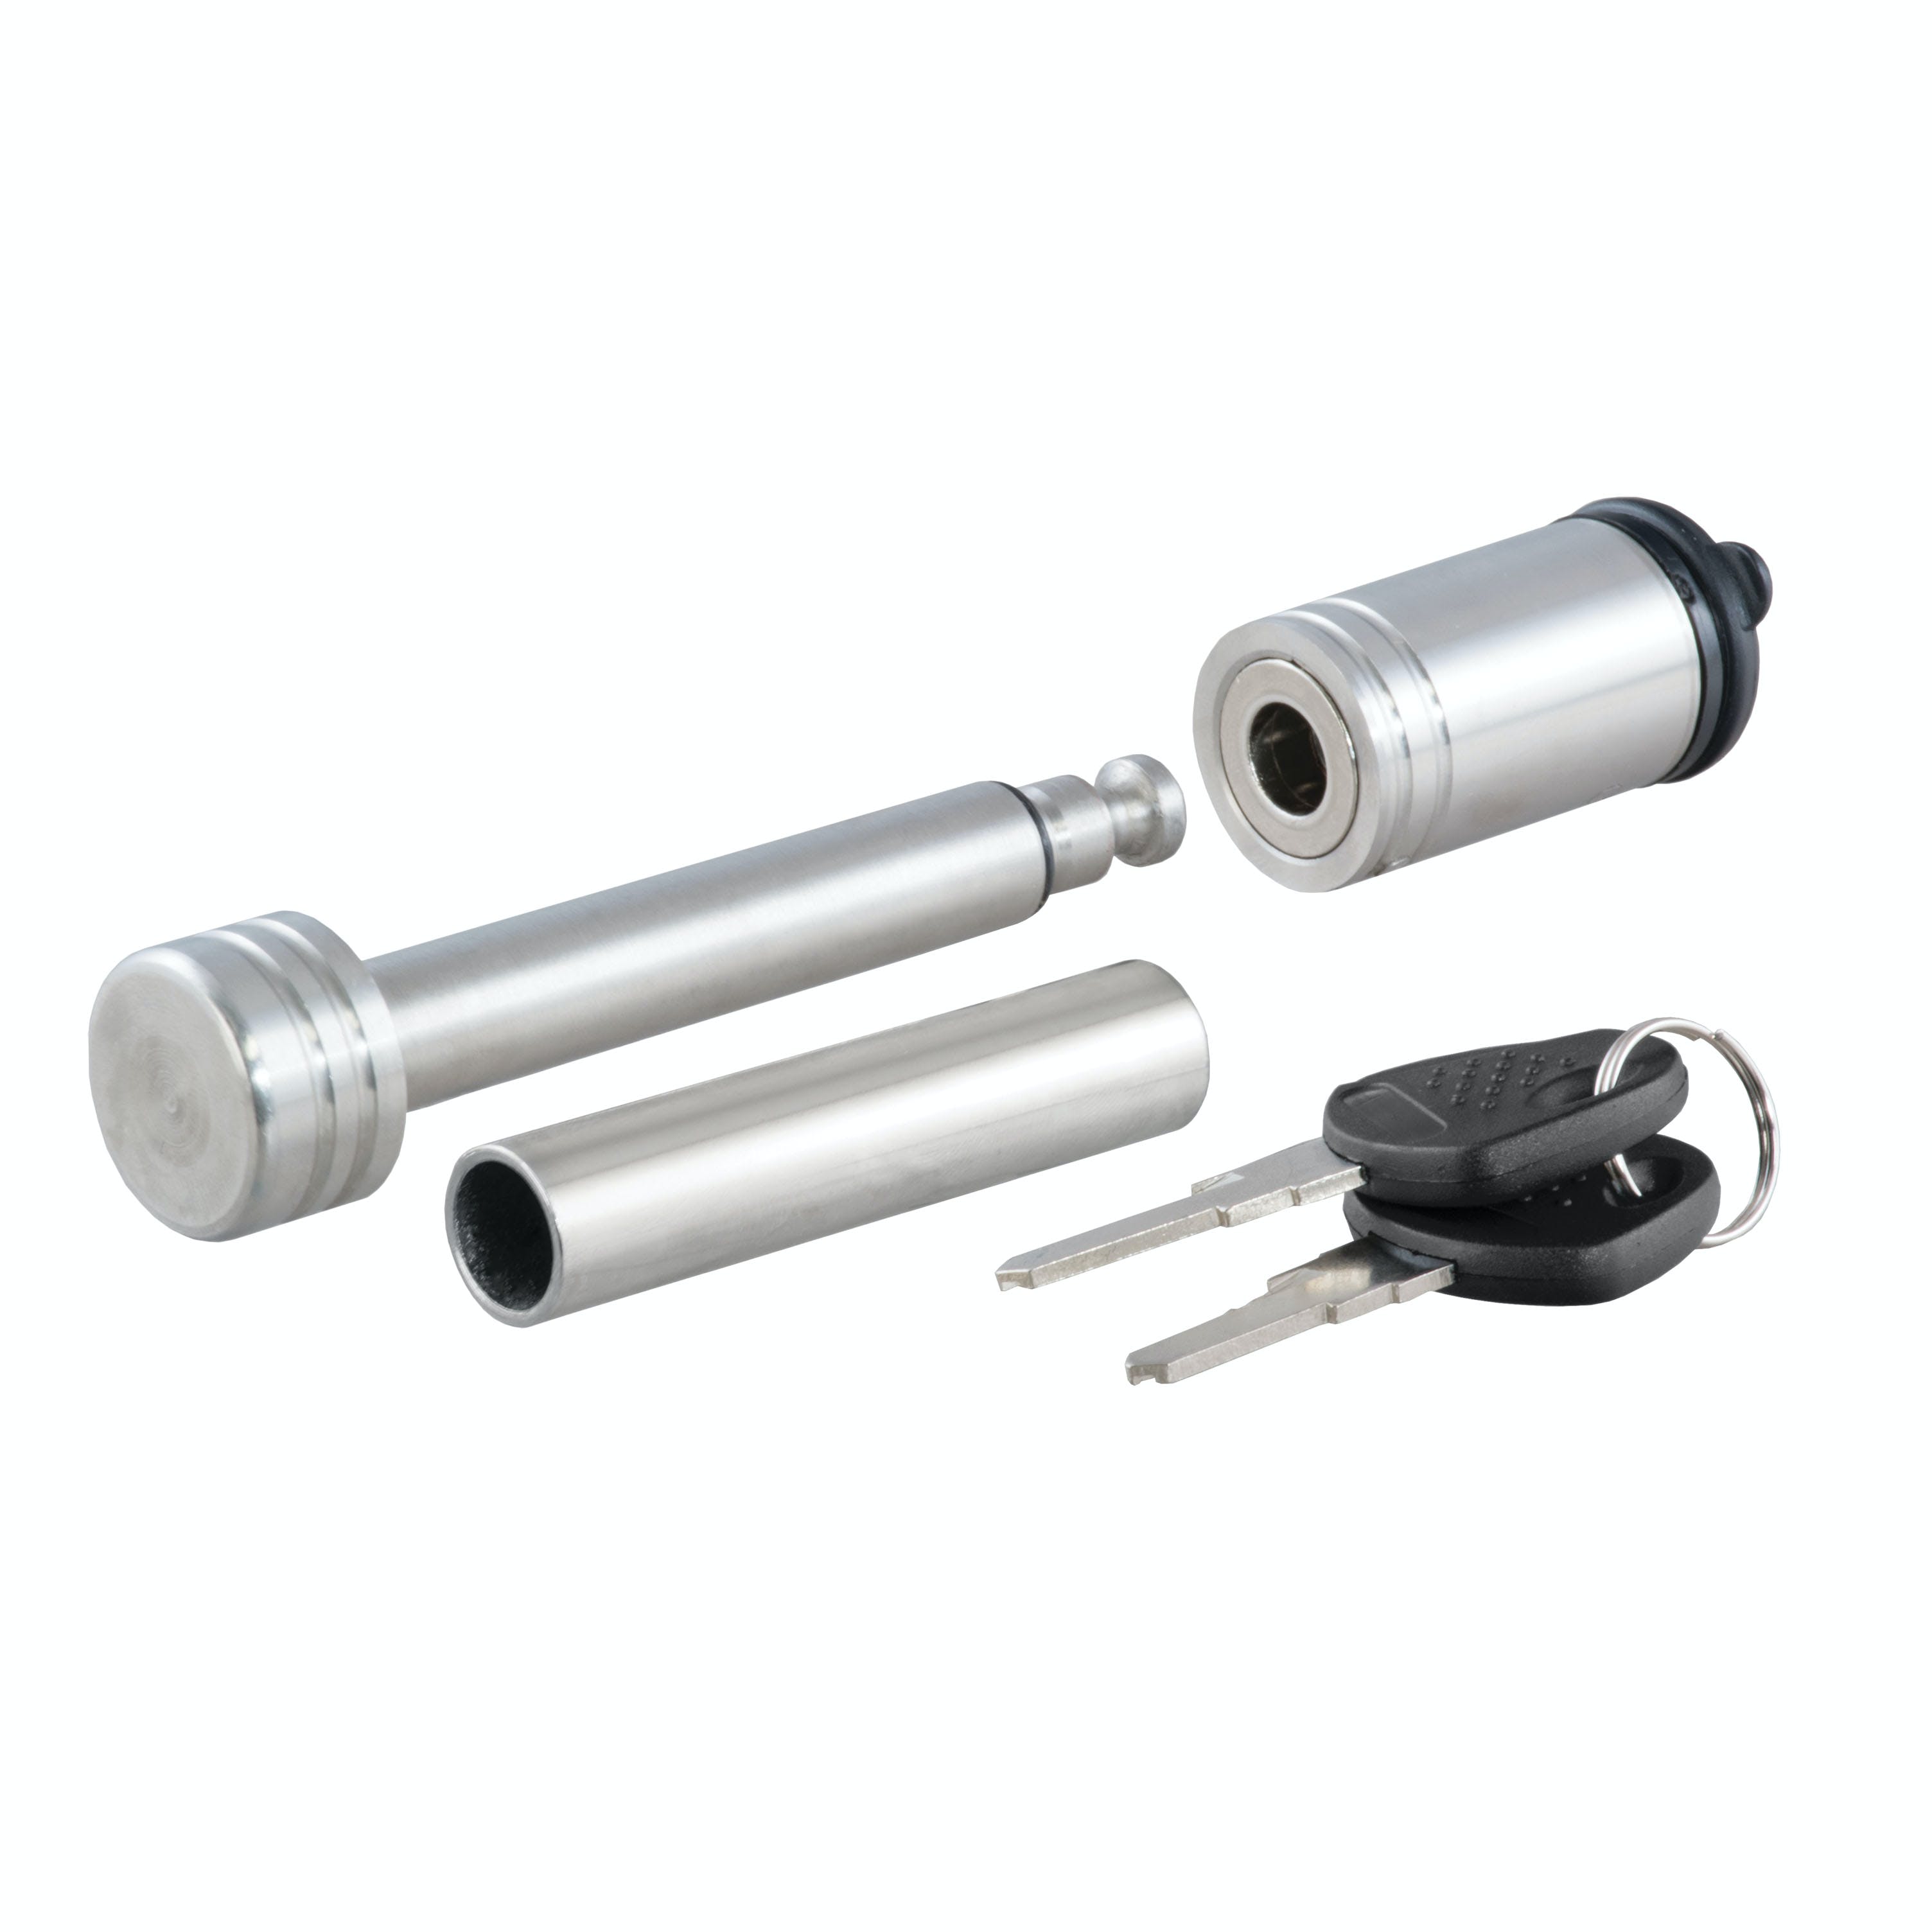 CURT 23517 1/2 Hitch Lock with 5/8 Adapter (1-1/4 or 2 Receiver, Barbell, Stainless)